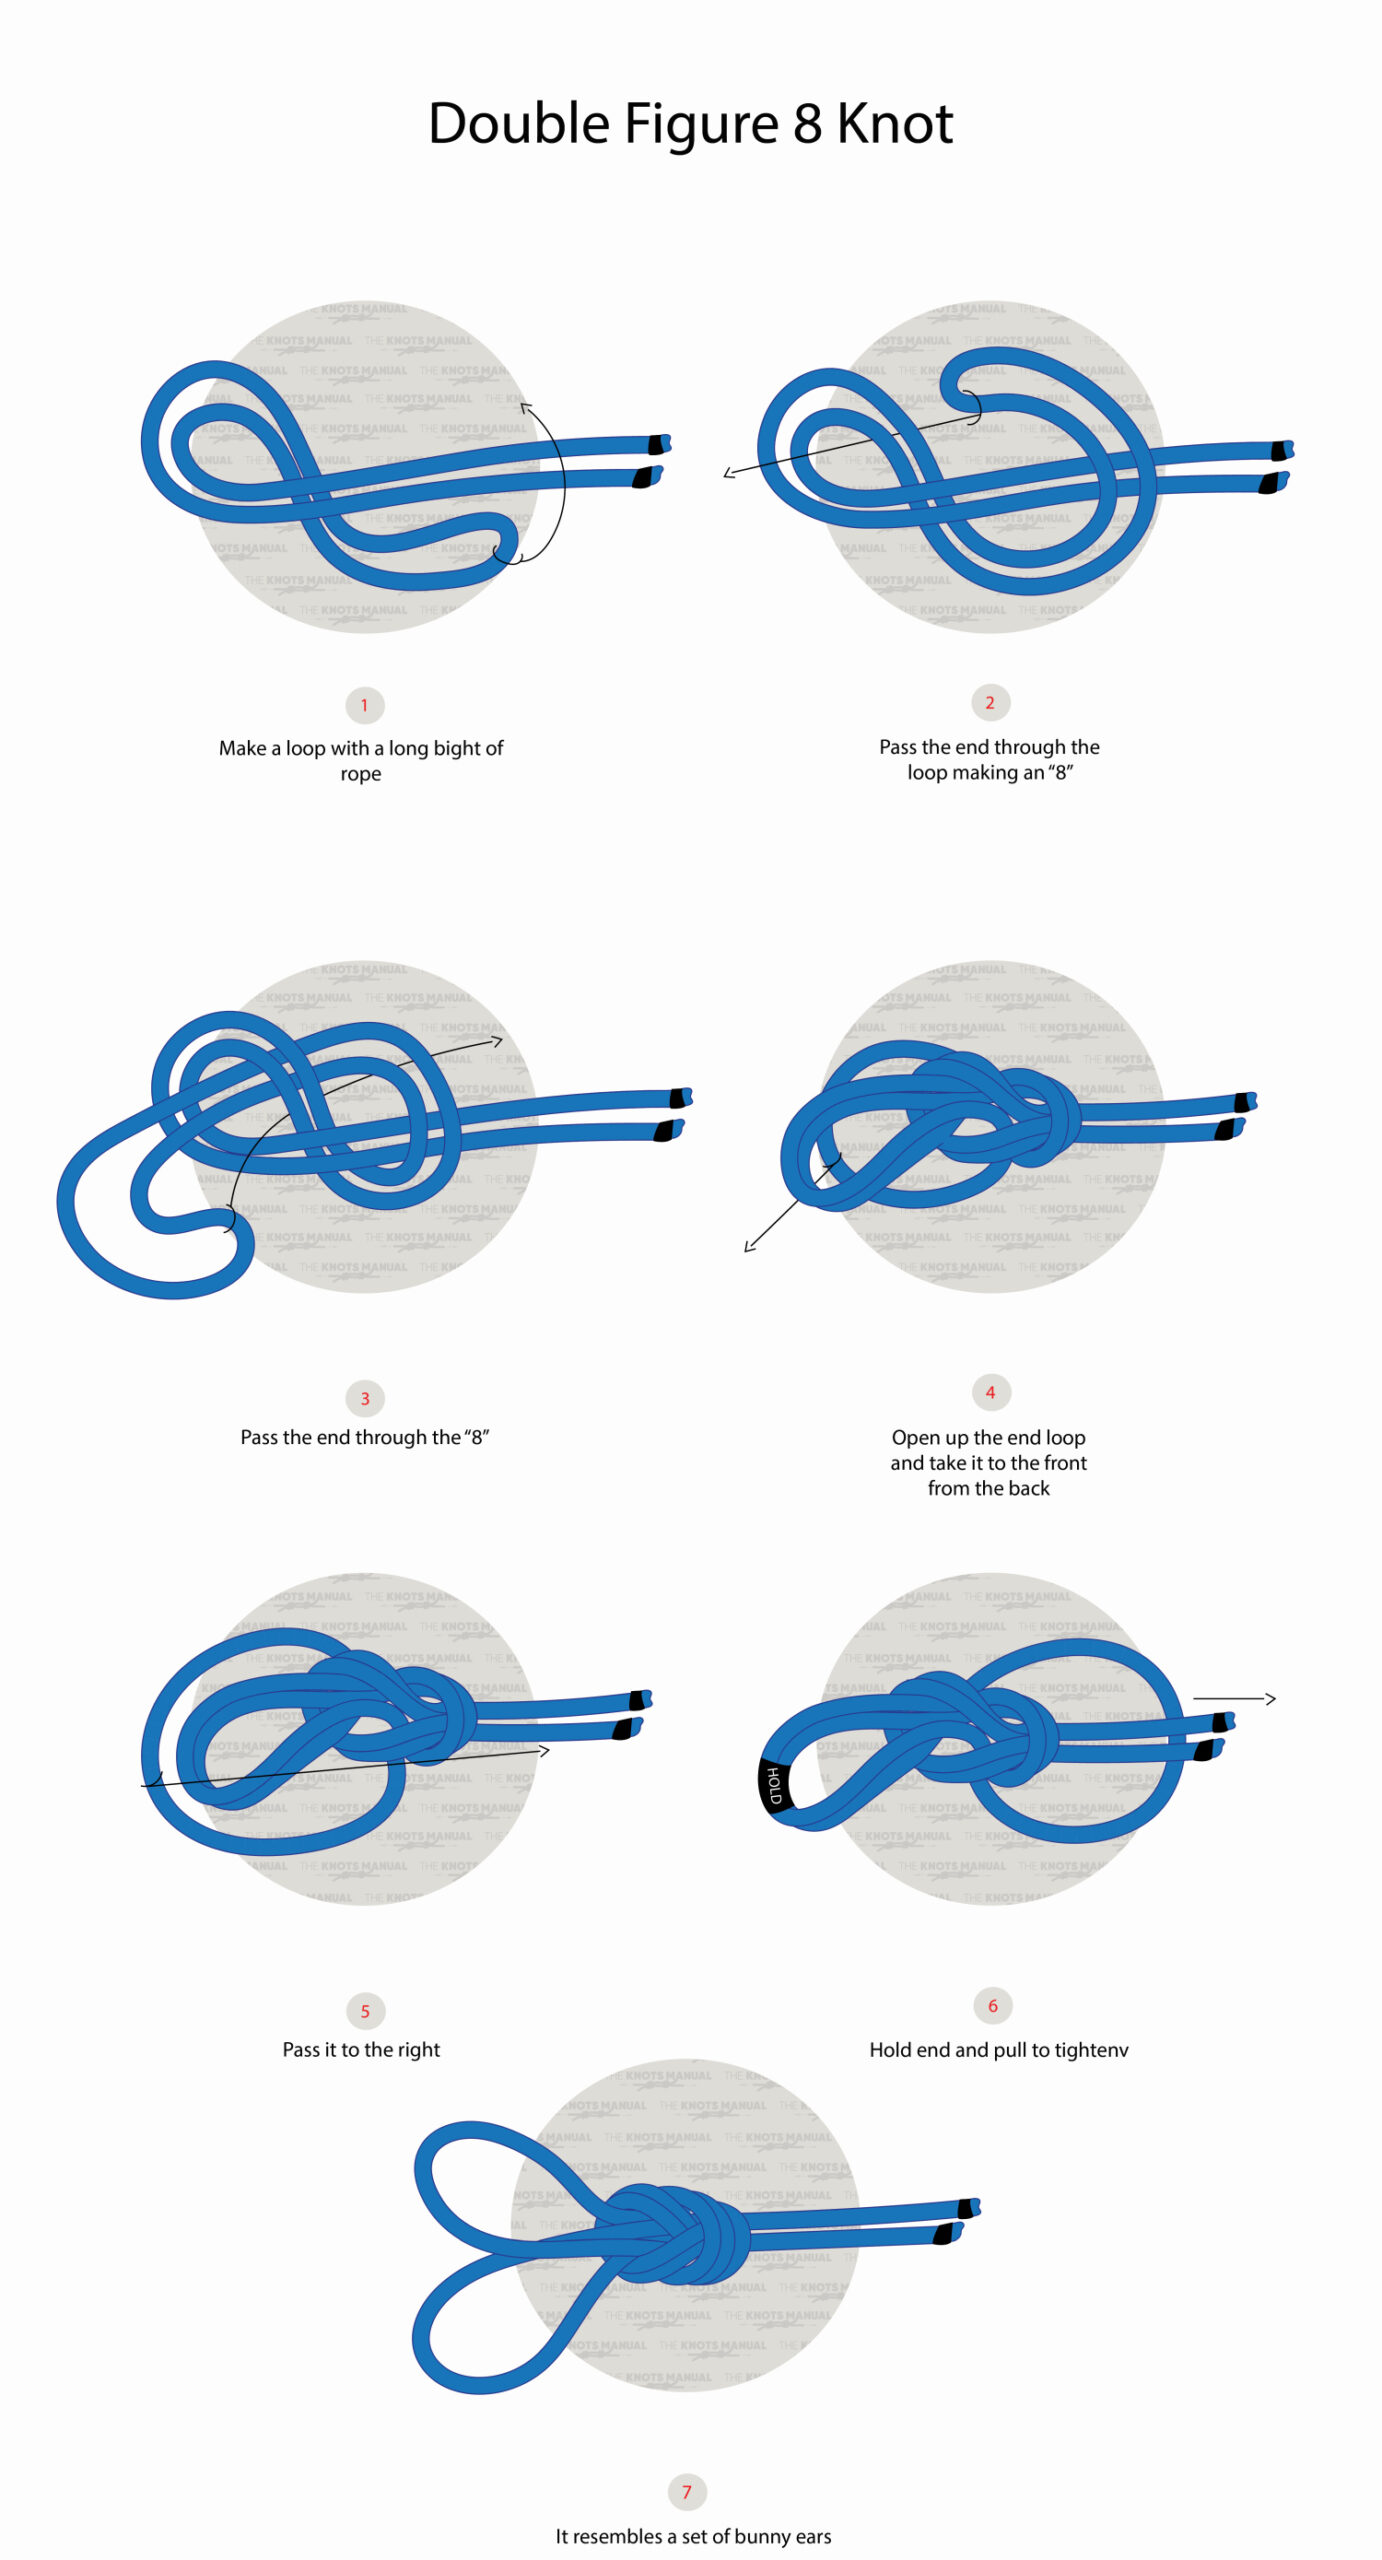 Double Figure 8 Knot Step by Step Guide